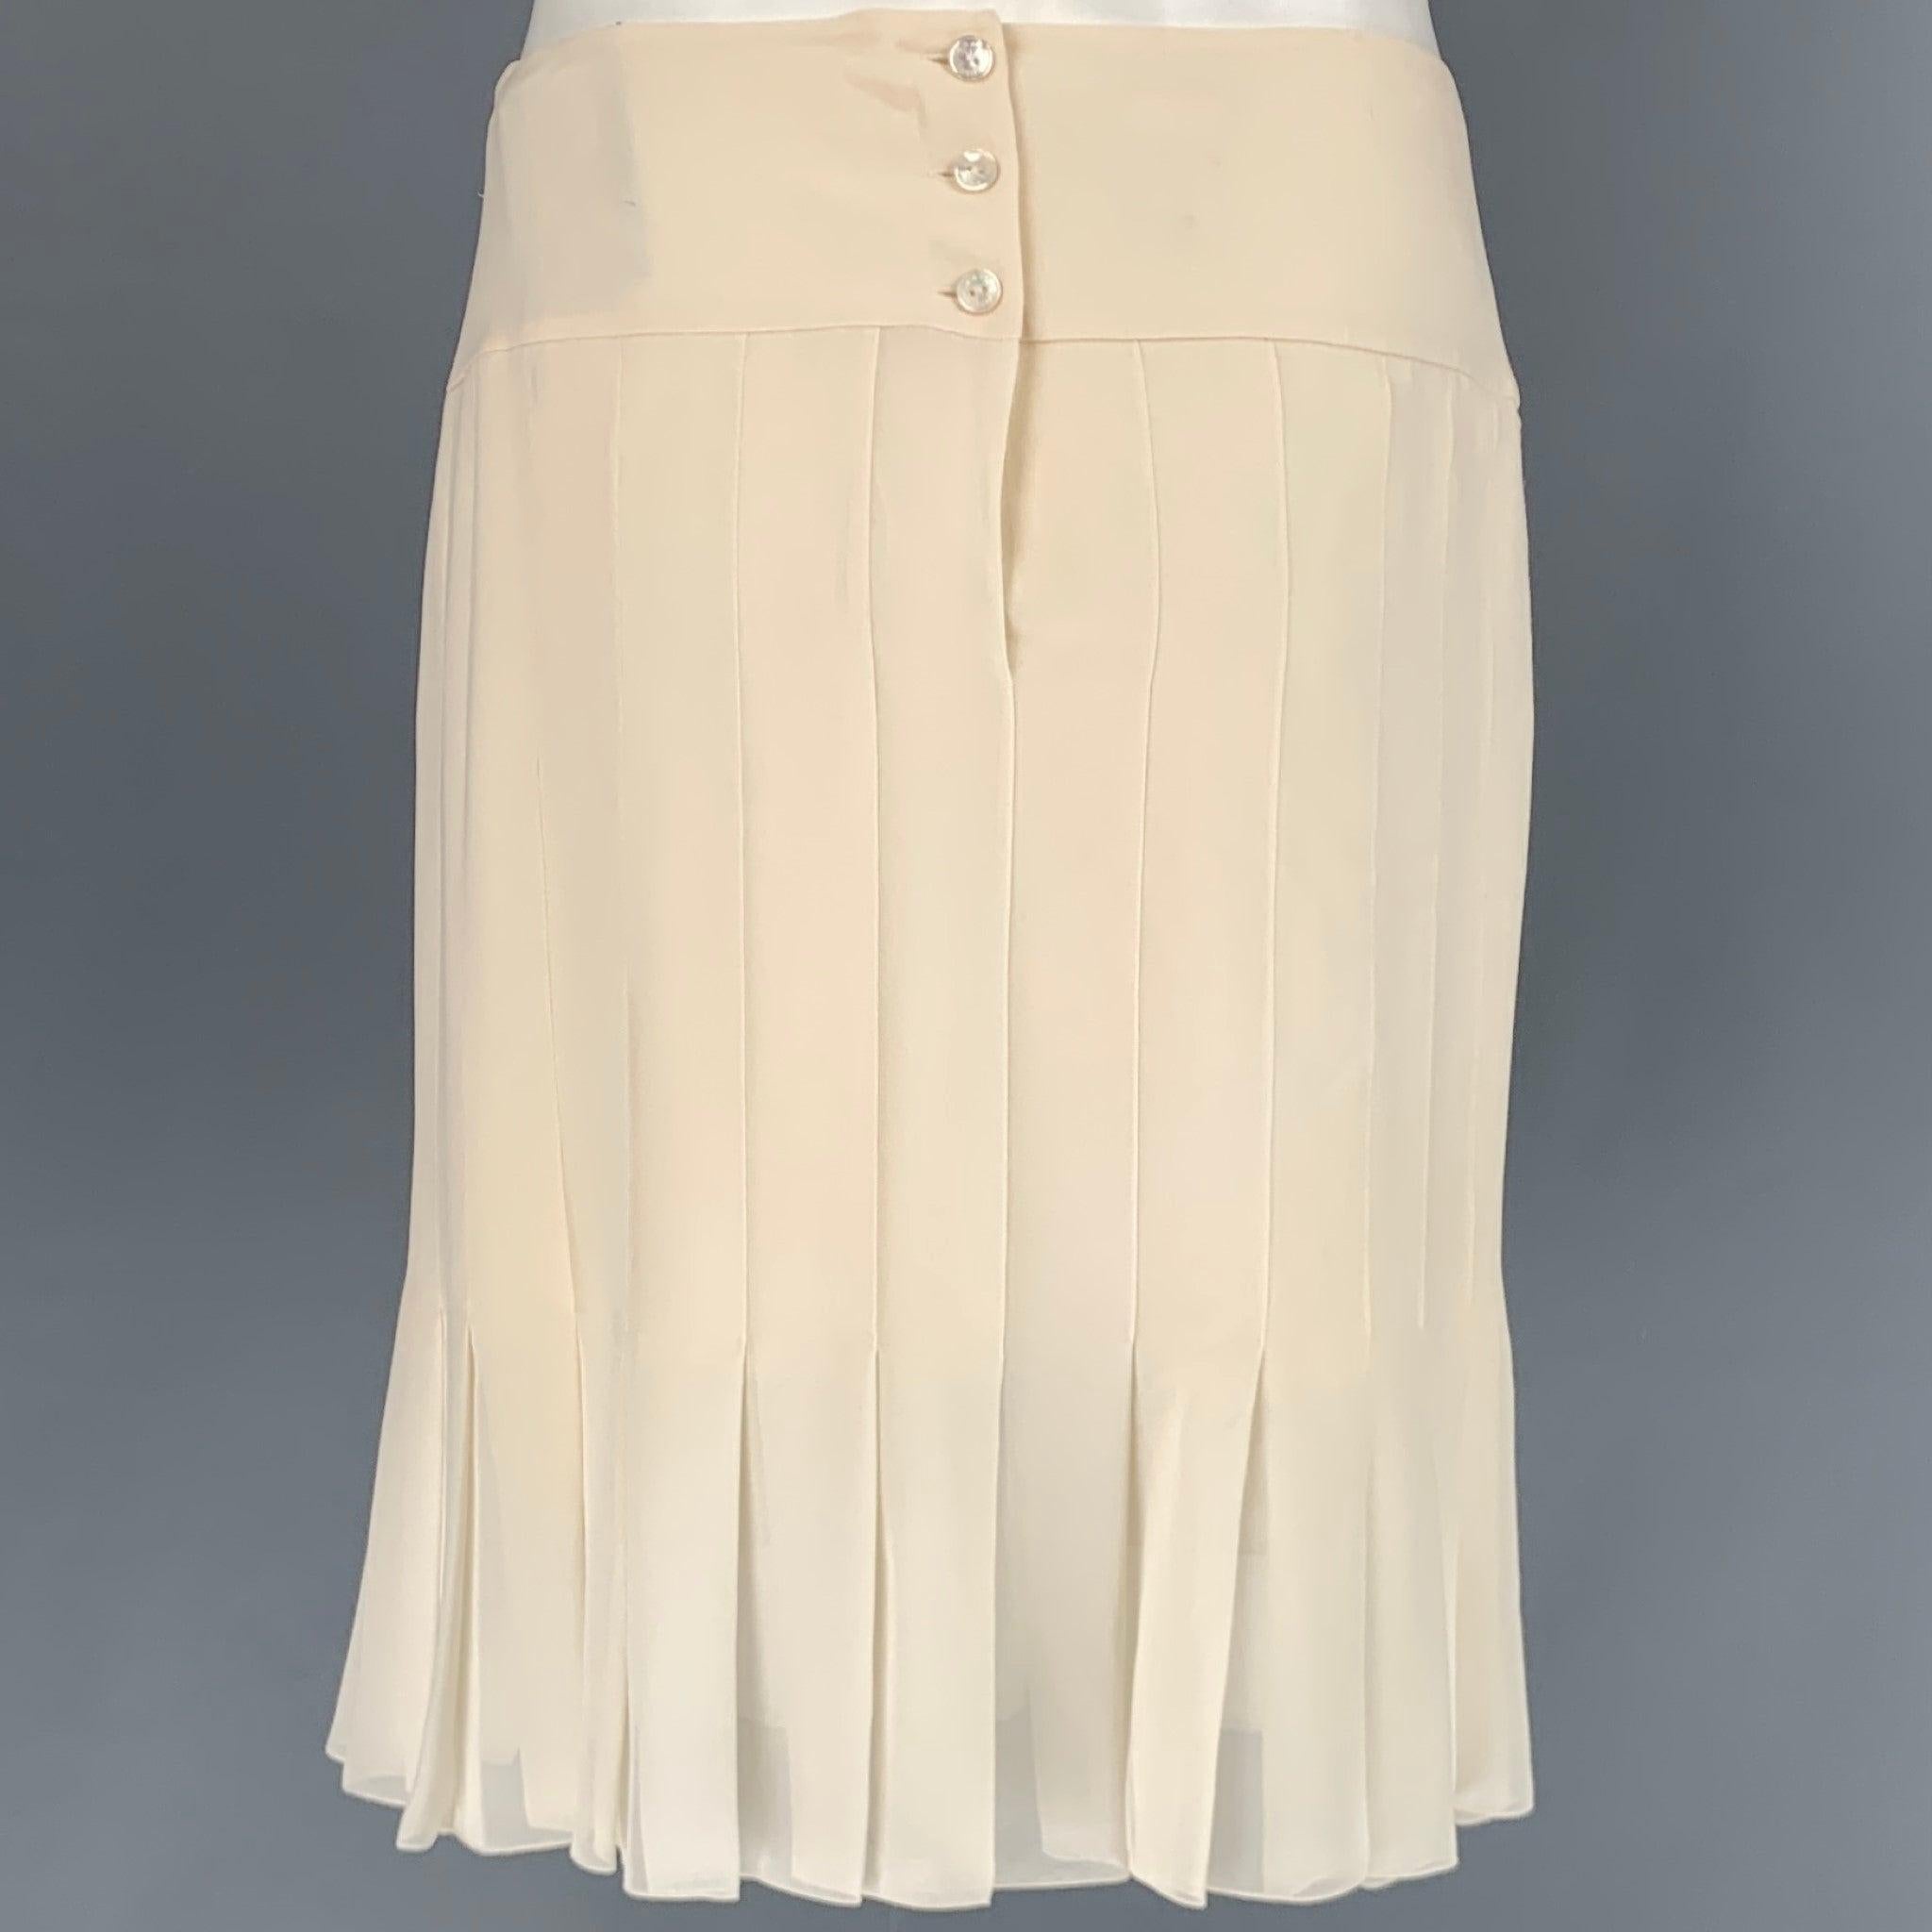 CHANEL 2004 skirt
in a cream silk fabric with a slip liner featuring a pleated style, and a back button closure. Made in
France.Very Good Pre-Owned Condition. Minor mark. 

Marked:   40 

Measurements: 
  Waist: 30 inches Hip: 37 inches Length: 22.5